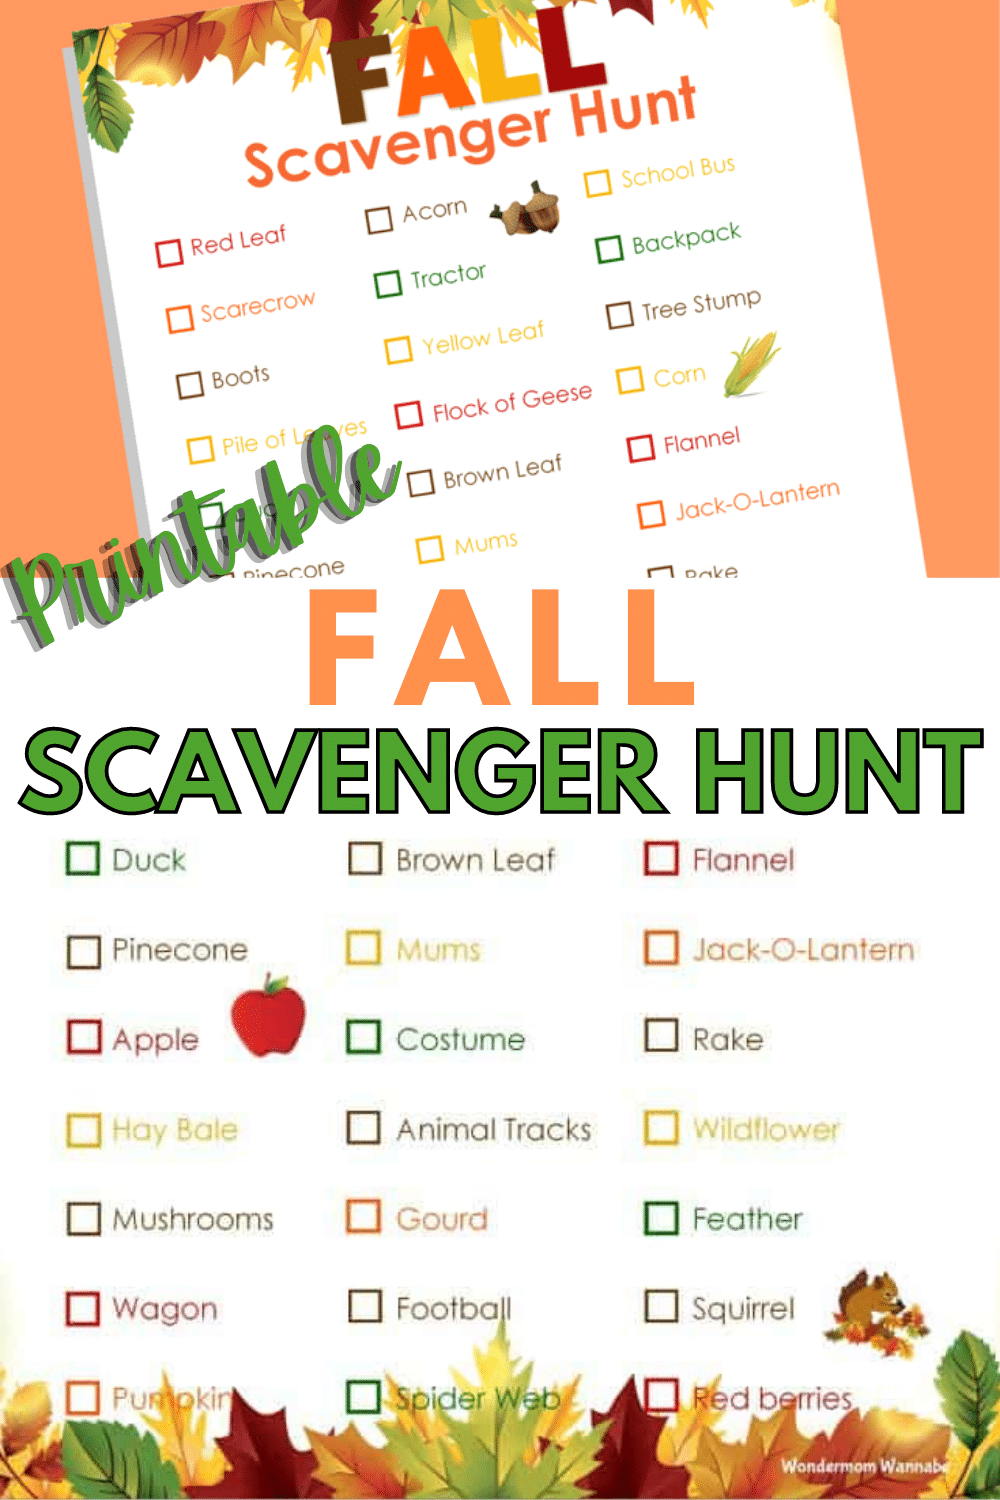 This printable fall scavenger hunt is fa fun and easy way to encourage kids to get outside and explore. #fall #scavengerhunt #kidsactivities #outdooractivities via @wondermomwannab